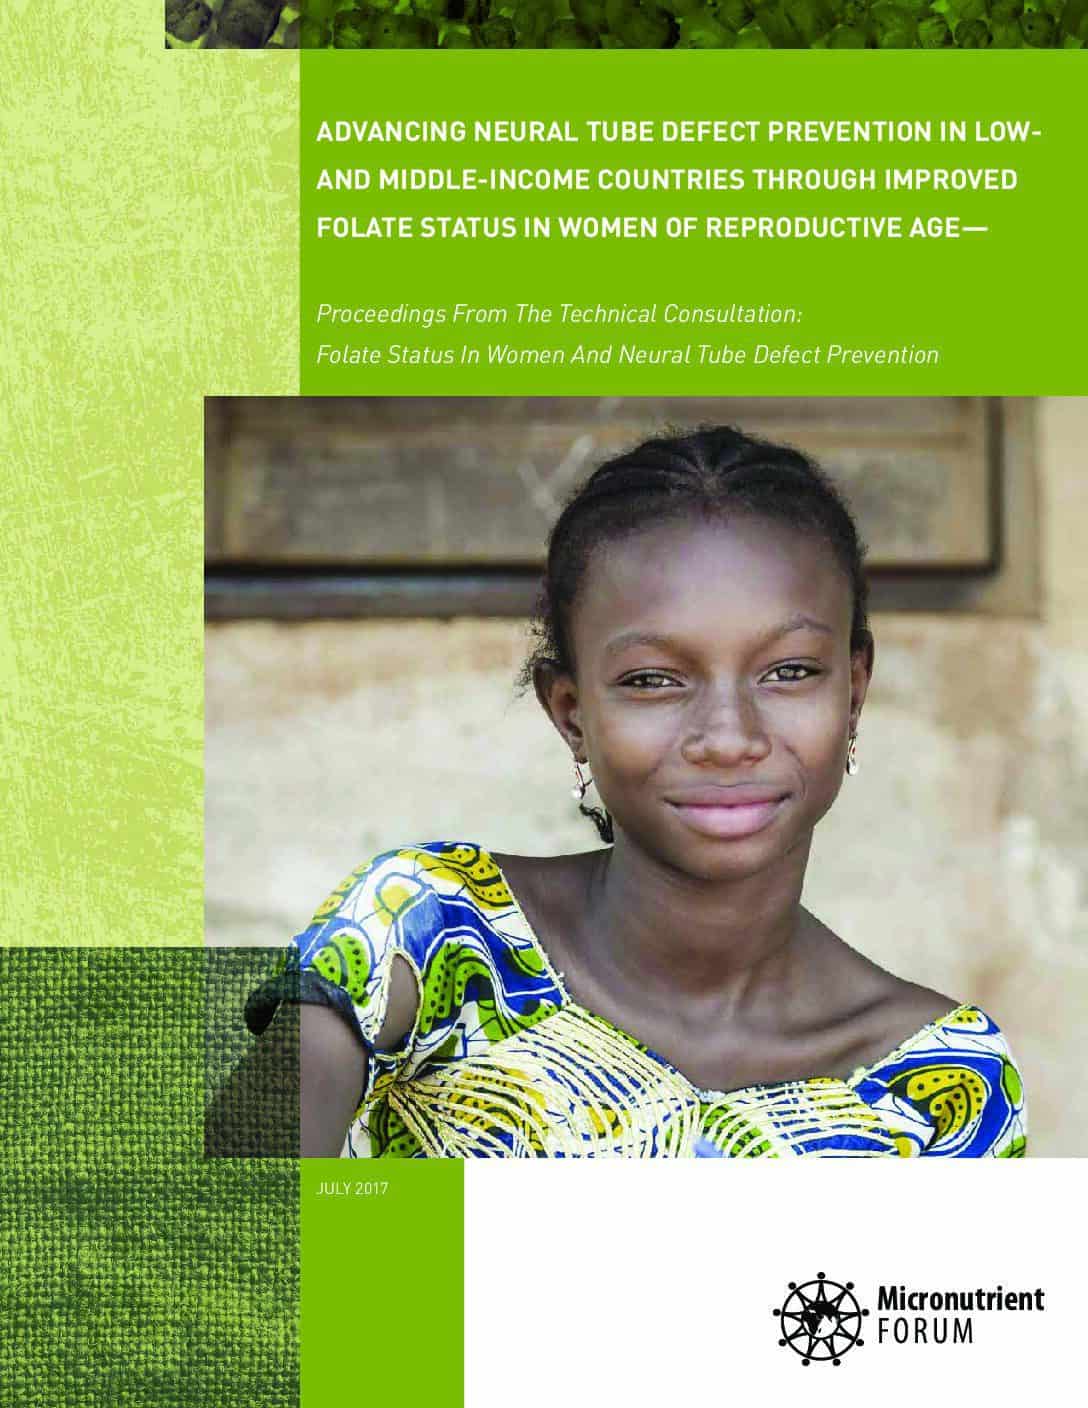 Advancing Neural Tube Defect Prevention in Low- and Middle-Income Countries through Improved Folate Status in Women of Reproductive Age- Proceedings from the Technical Consultation: Folate Status in Women and Neural Tube Defect Prevention thumbnail